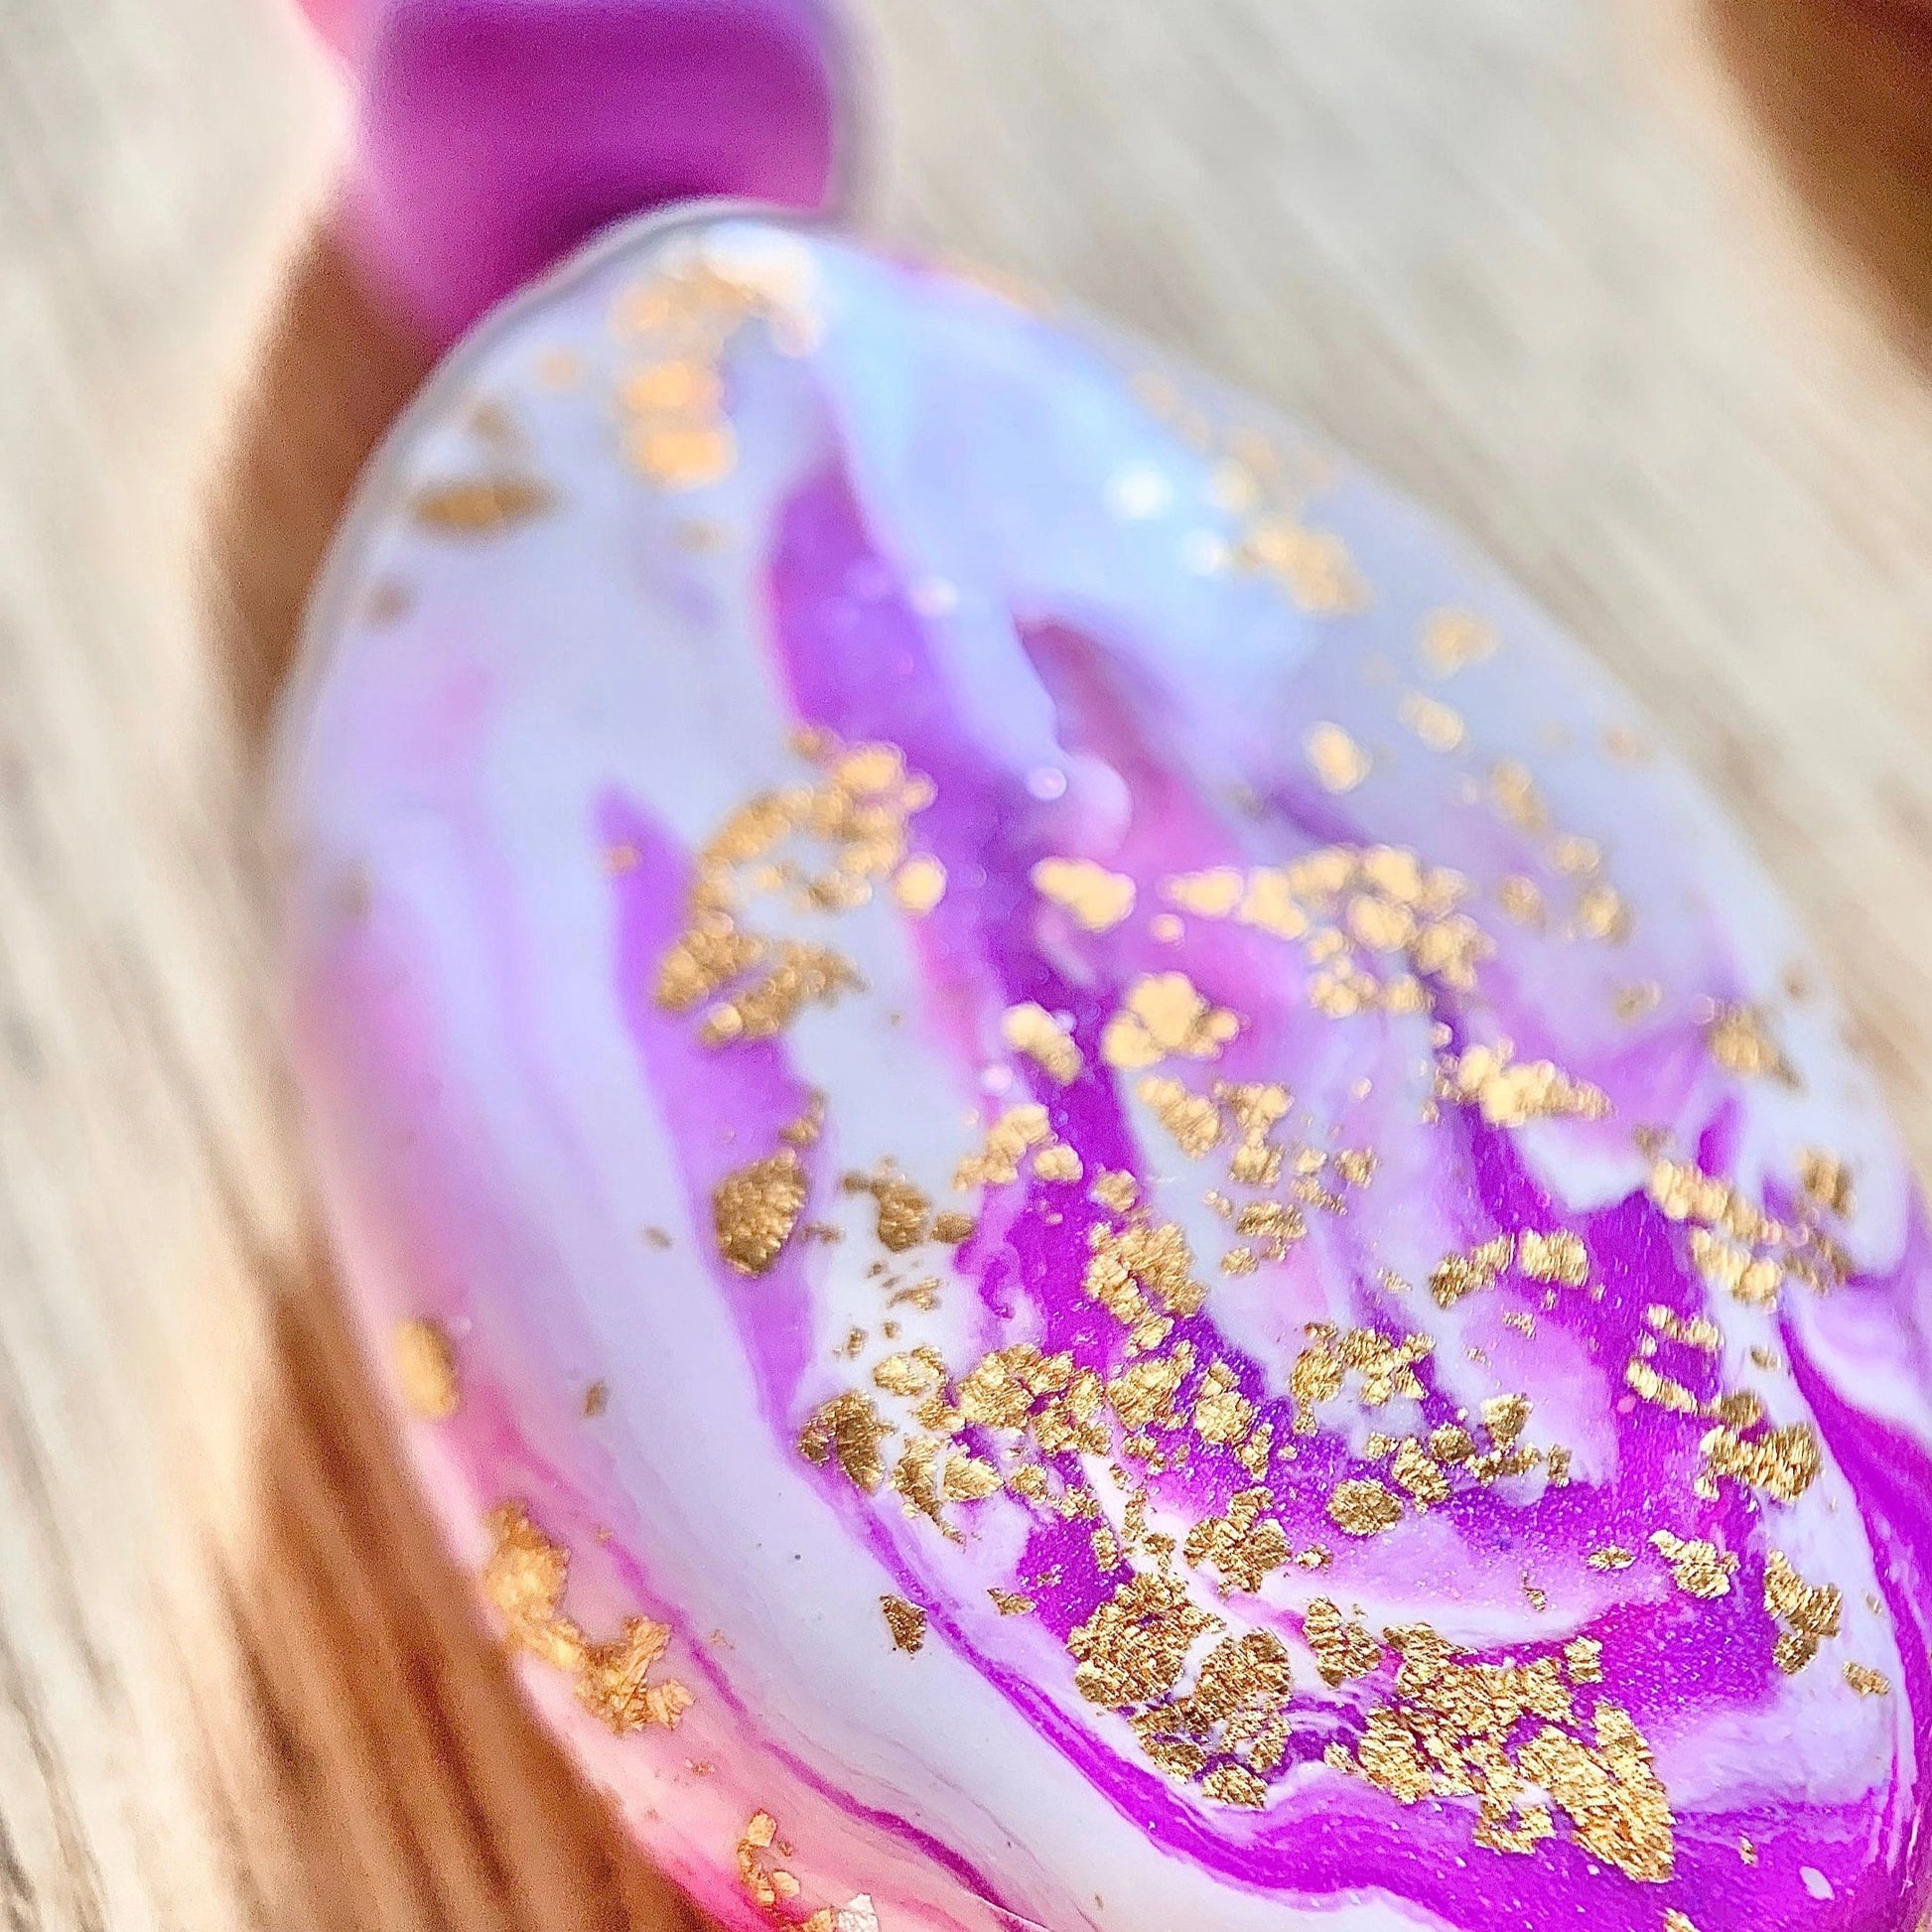 up close to the intricate details including purple and white clay and gold leaf foil to look like a precious gemstone